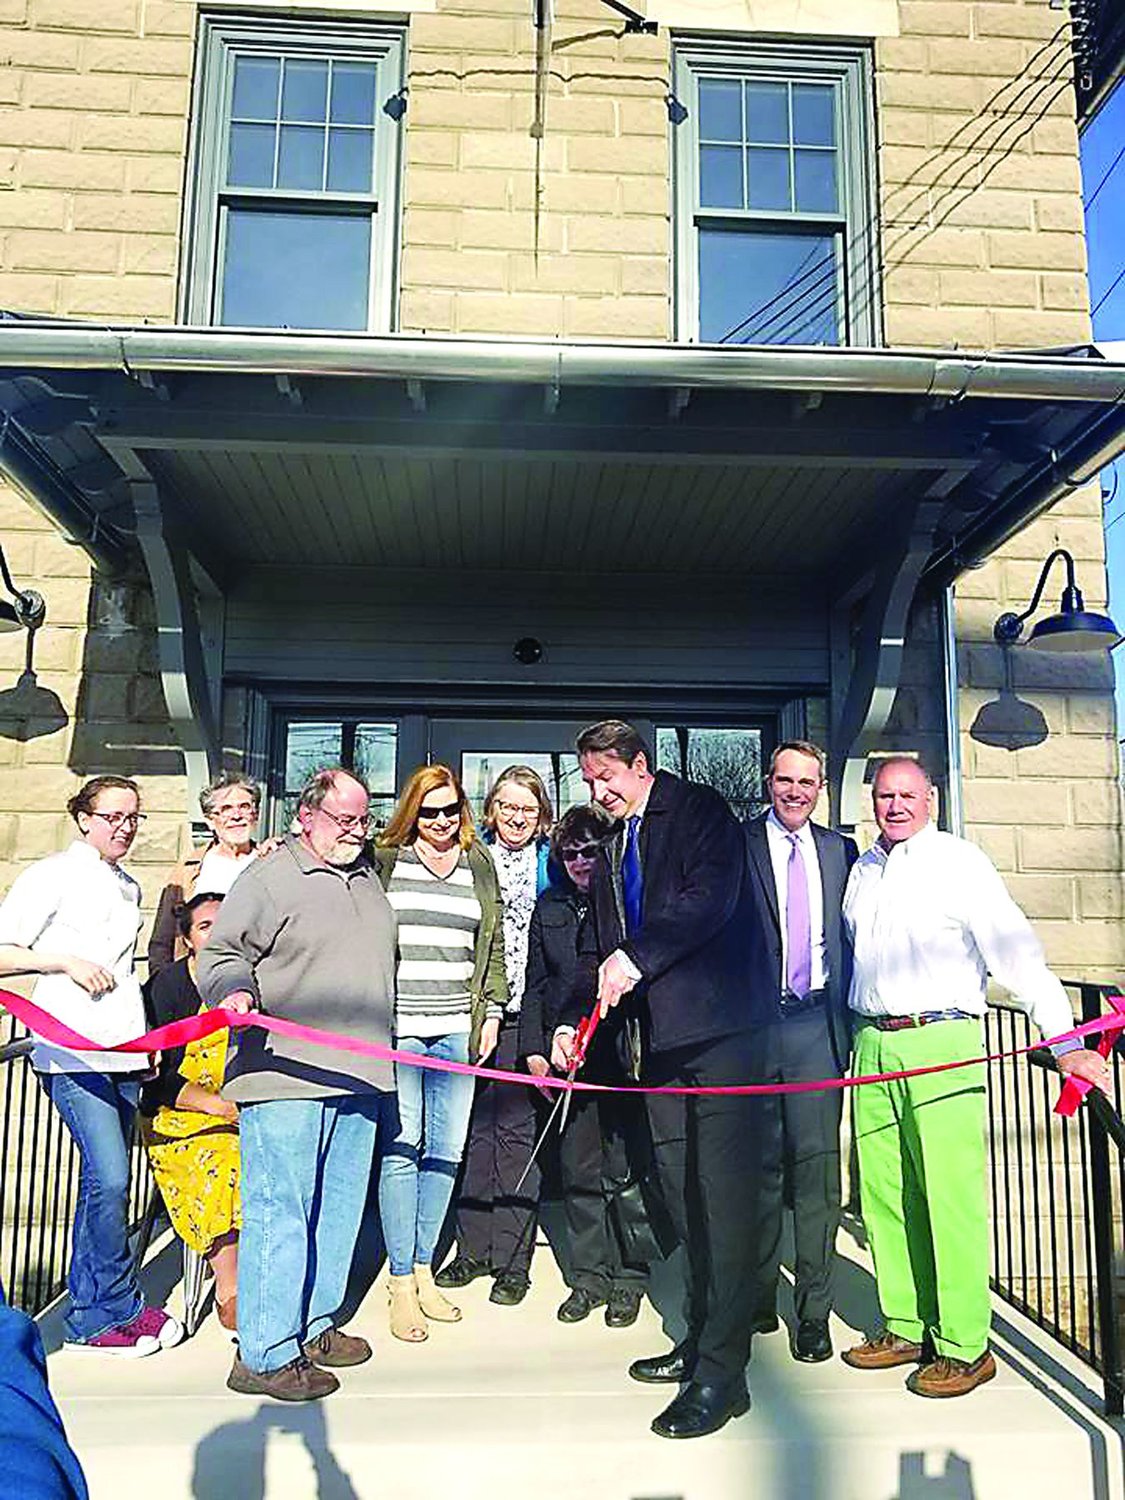 At the Ribbon Cutting at the new Owowcow Creamery in Chalfont Thursday, April 4, are from left, Amanda Cox, executive chef Owowcow; seated, Shira Wade, general manager Owowcow; John Fezzouglio, owner Owowcow; Chalfont Borough Council President John Engel, council members Tracey Bowen and Marilyn Jacobson, former Mayor Marilyn Becker, Mayor Brian Wallace, State Sen. Steve Santarsiero and Council Member John Abbott.